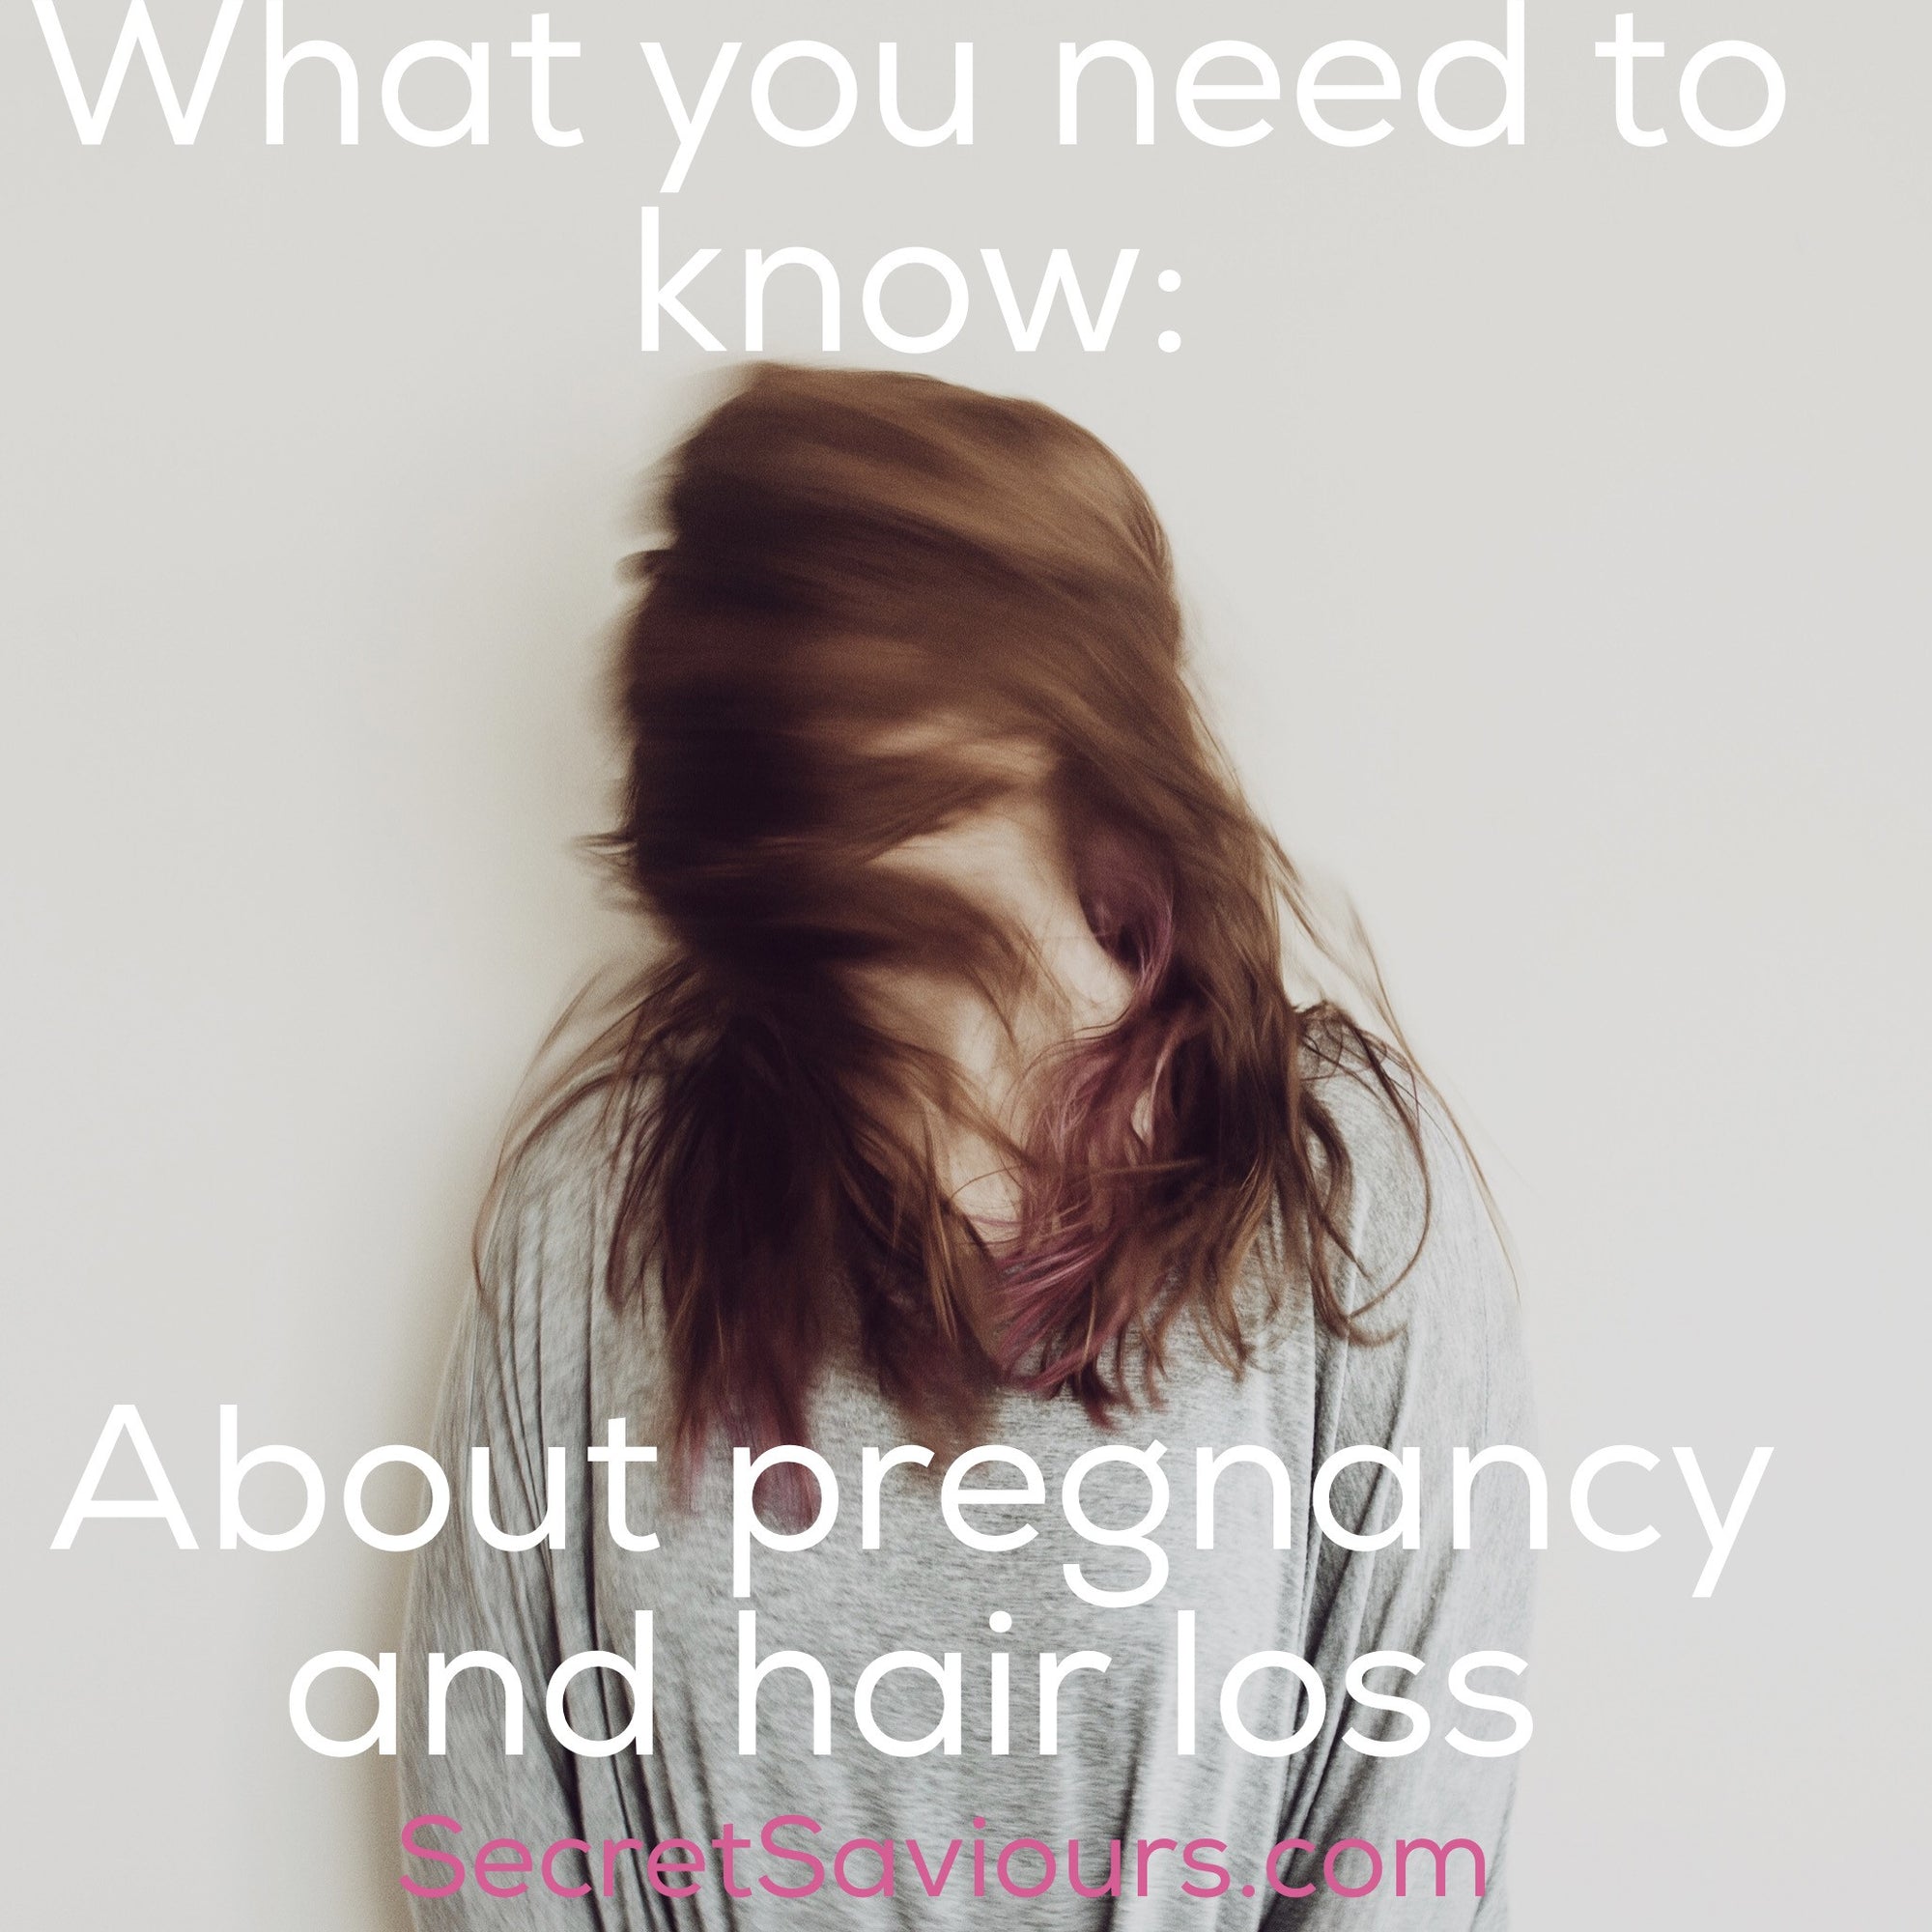 What you really need to know about: Hair loss during pregnancy